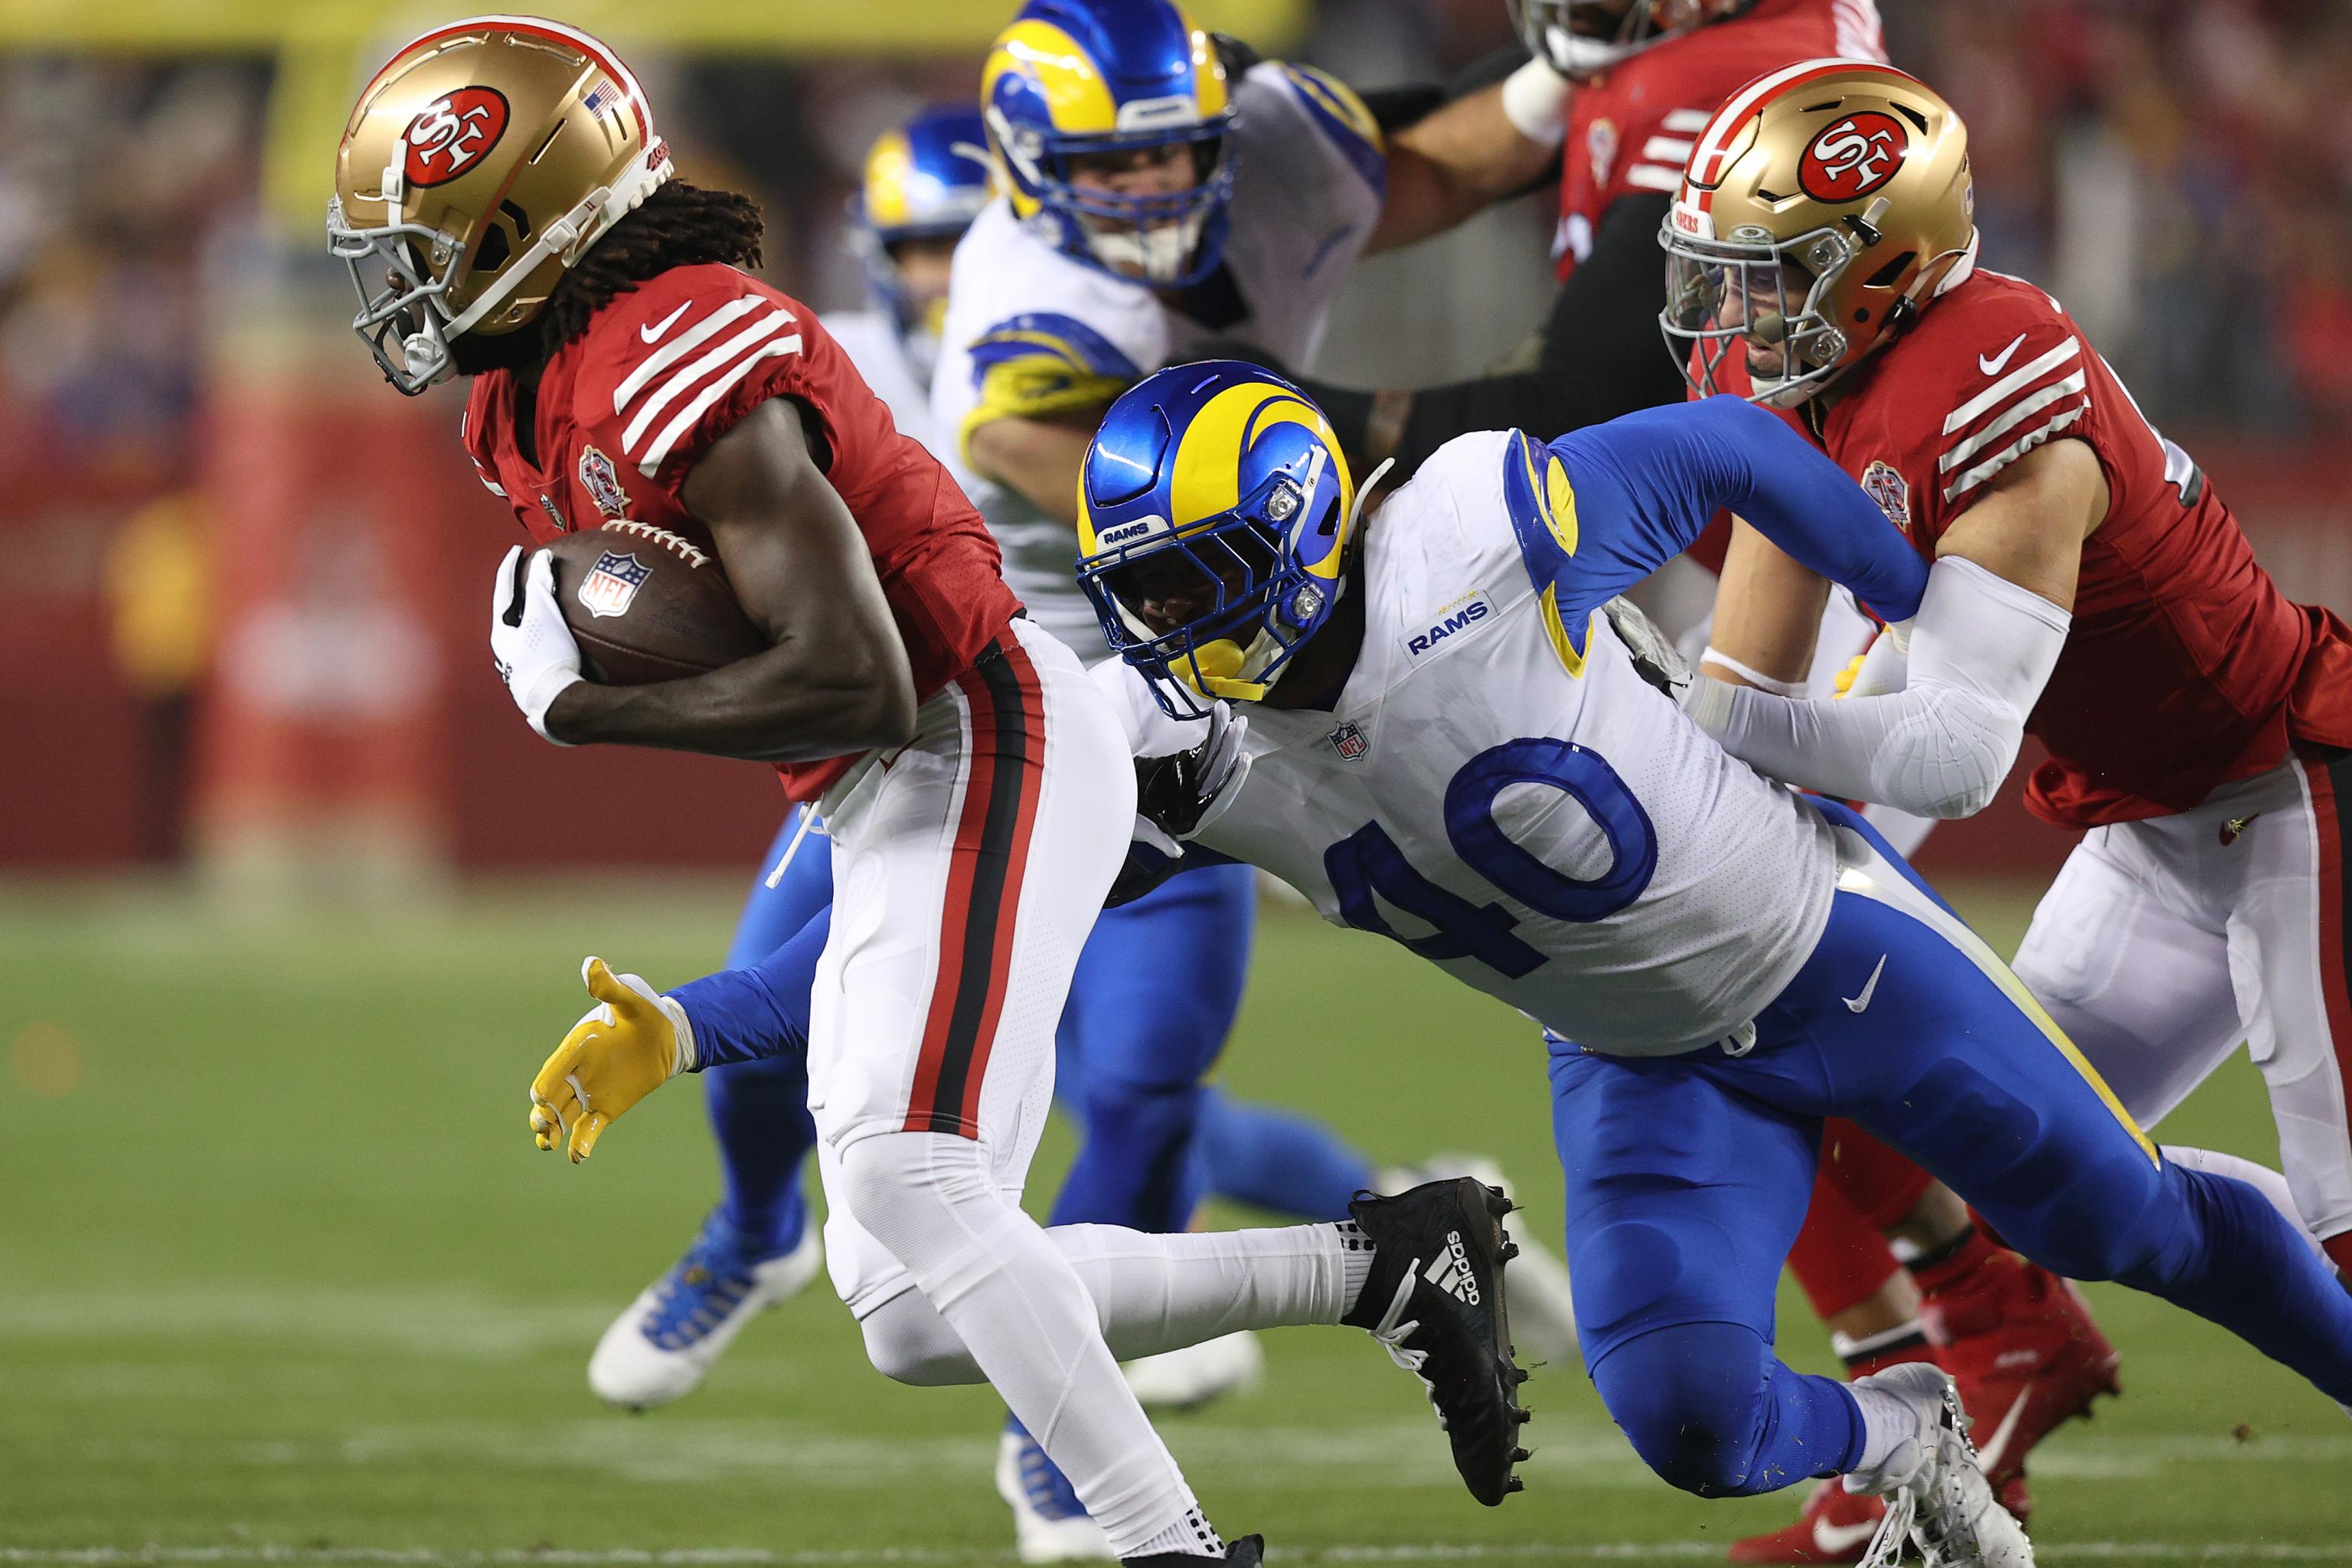 rams against the 49ers